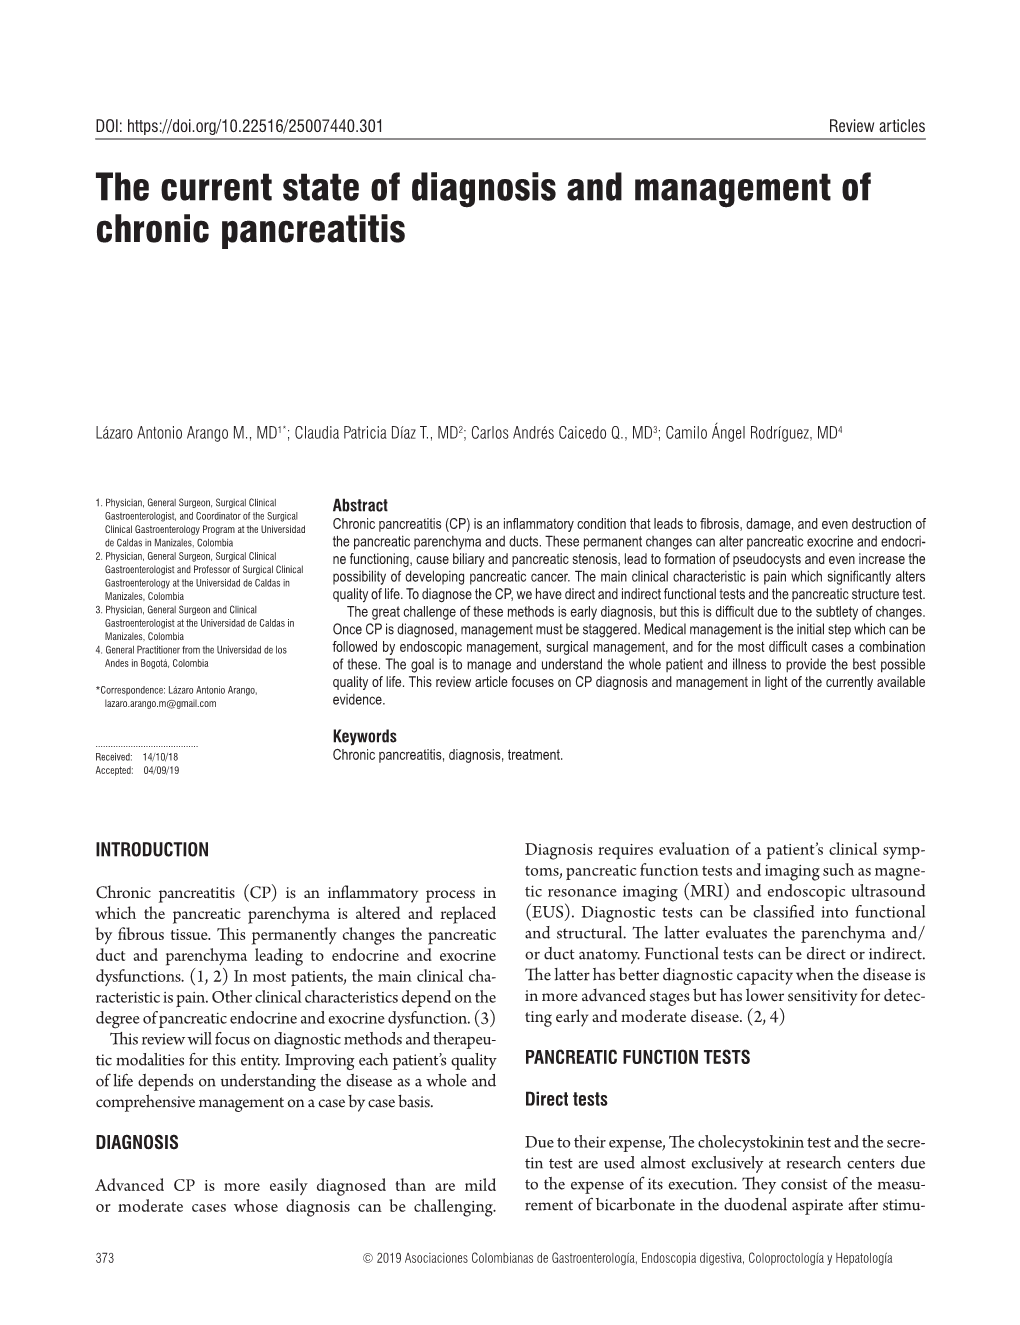 The Current State of Diagnosis and Management of Chronic Pancreatitis